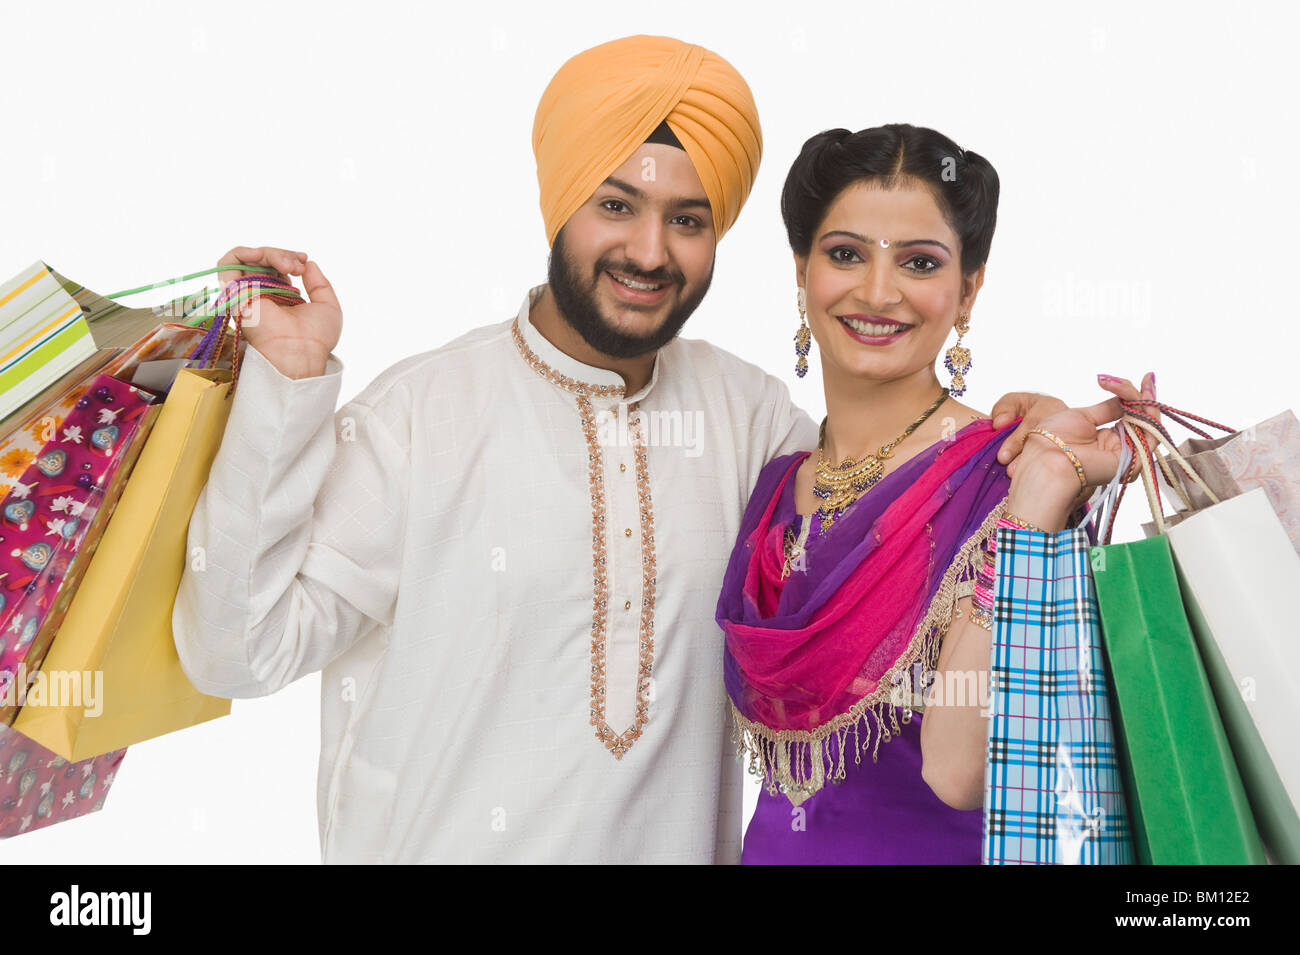 Portrait of a Sikh couple carrying shopping bags Stock Photo